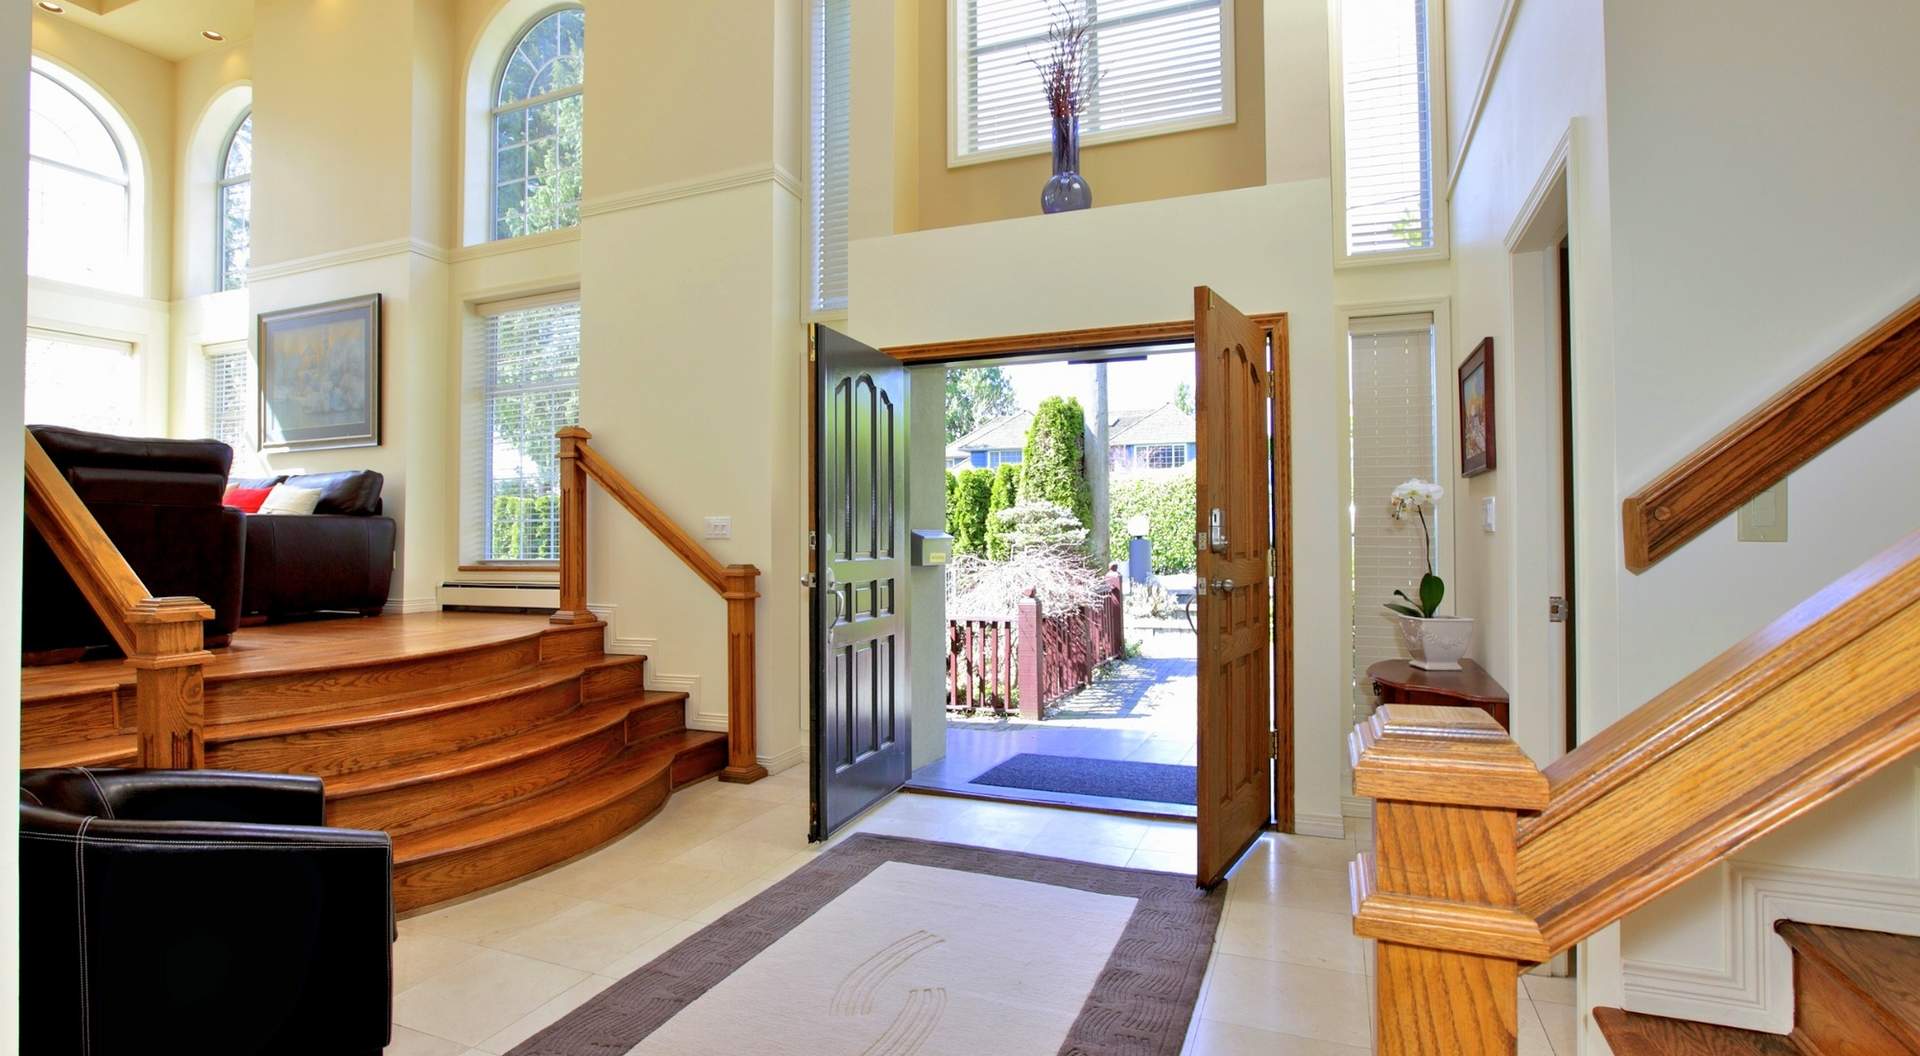 Main Entry with Double Height Ceilings